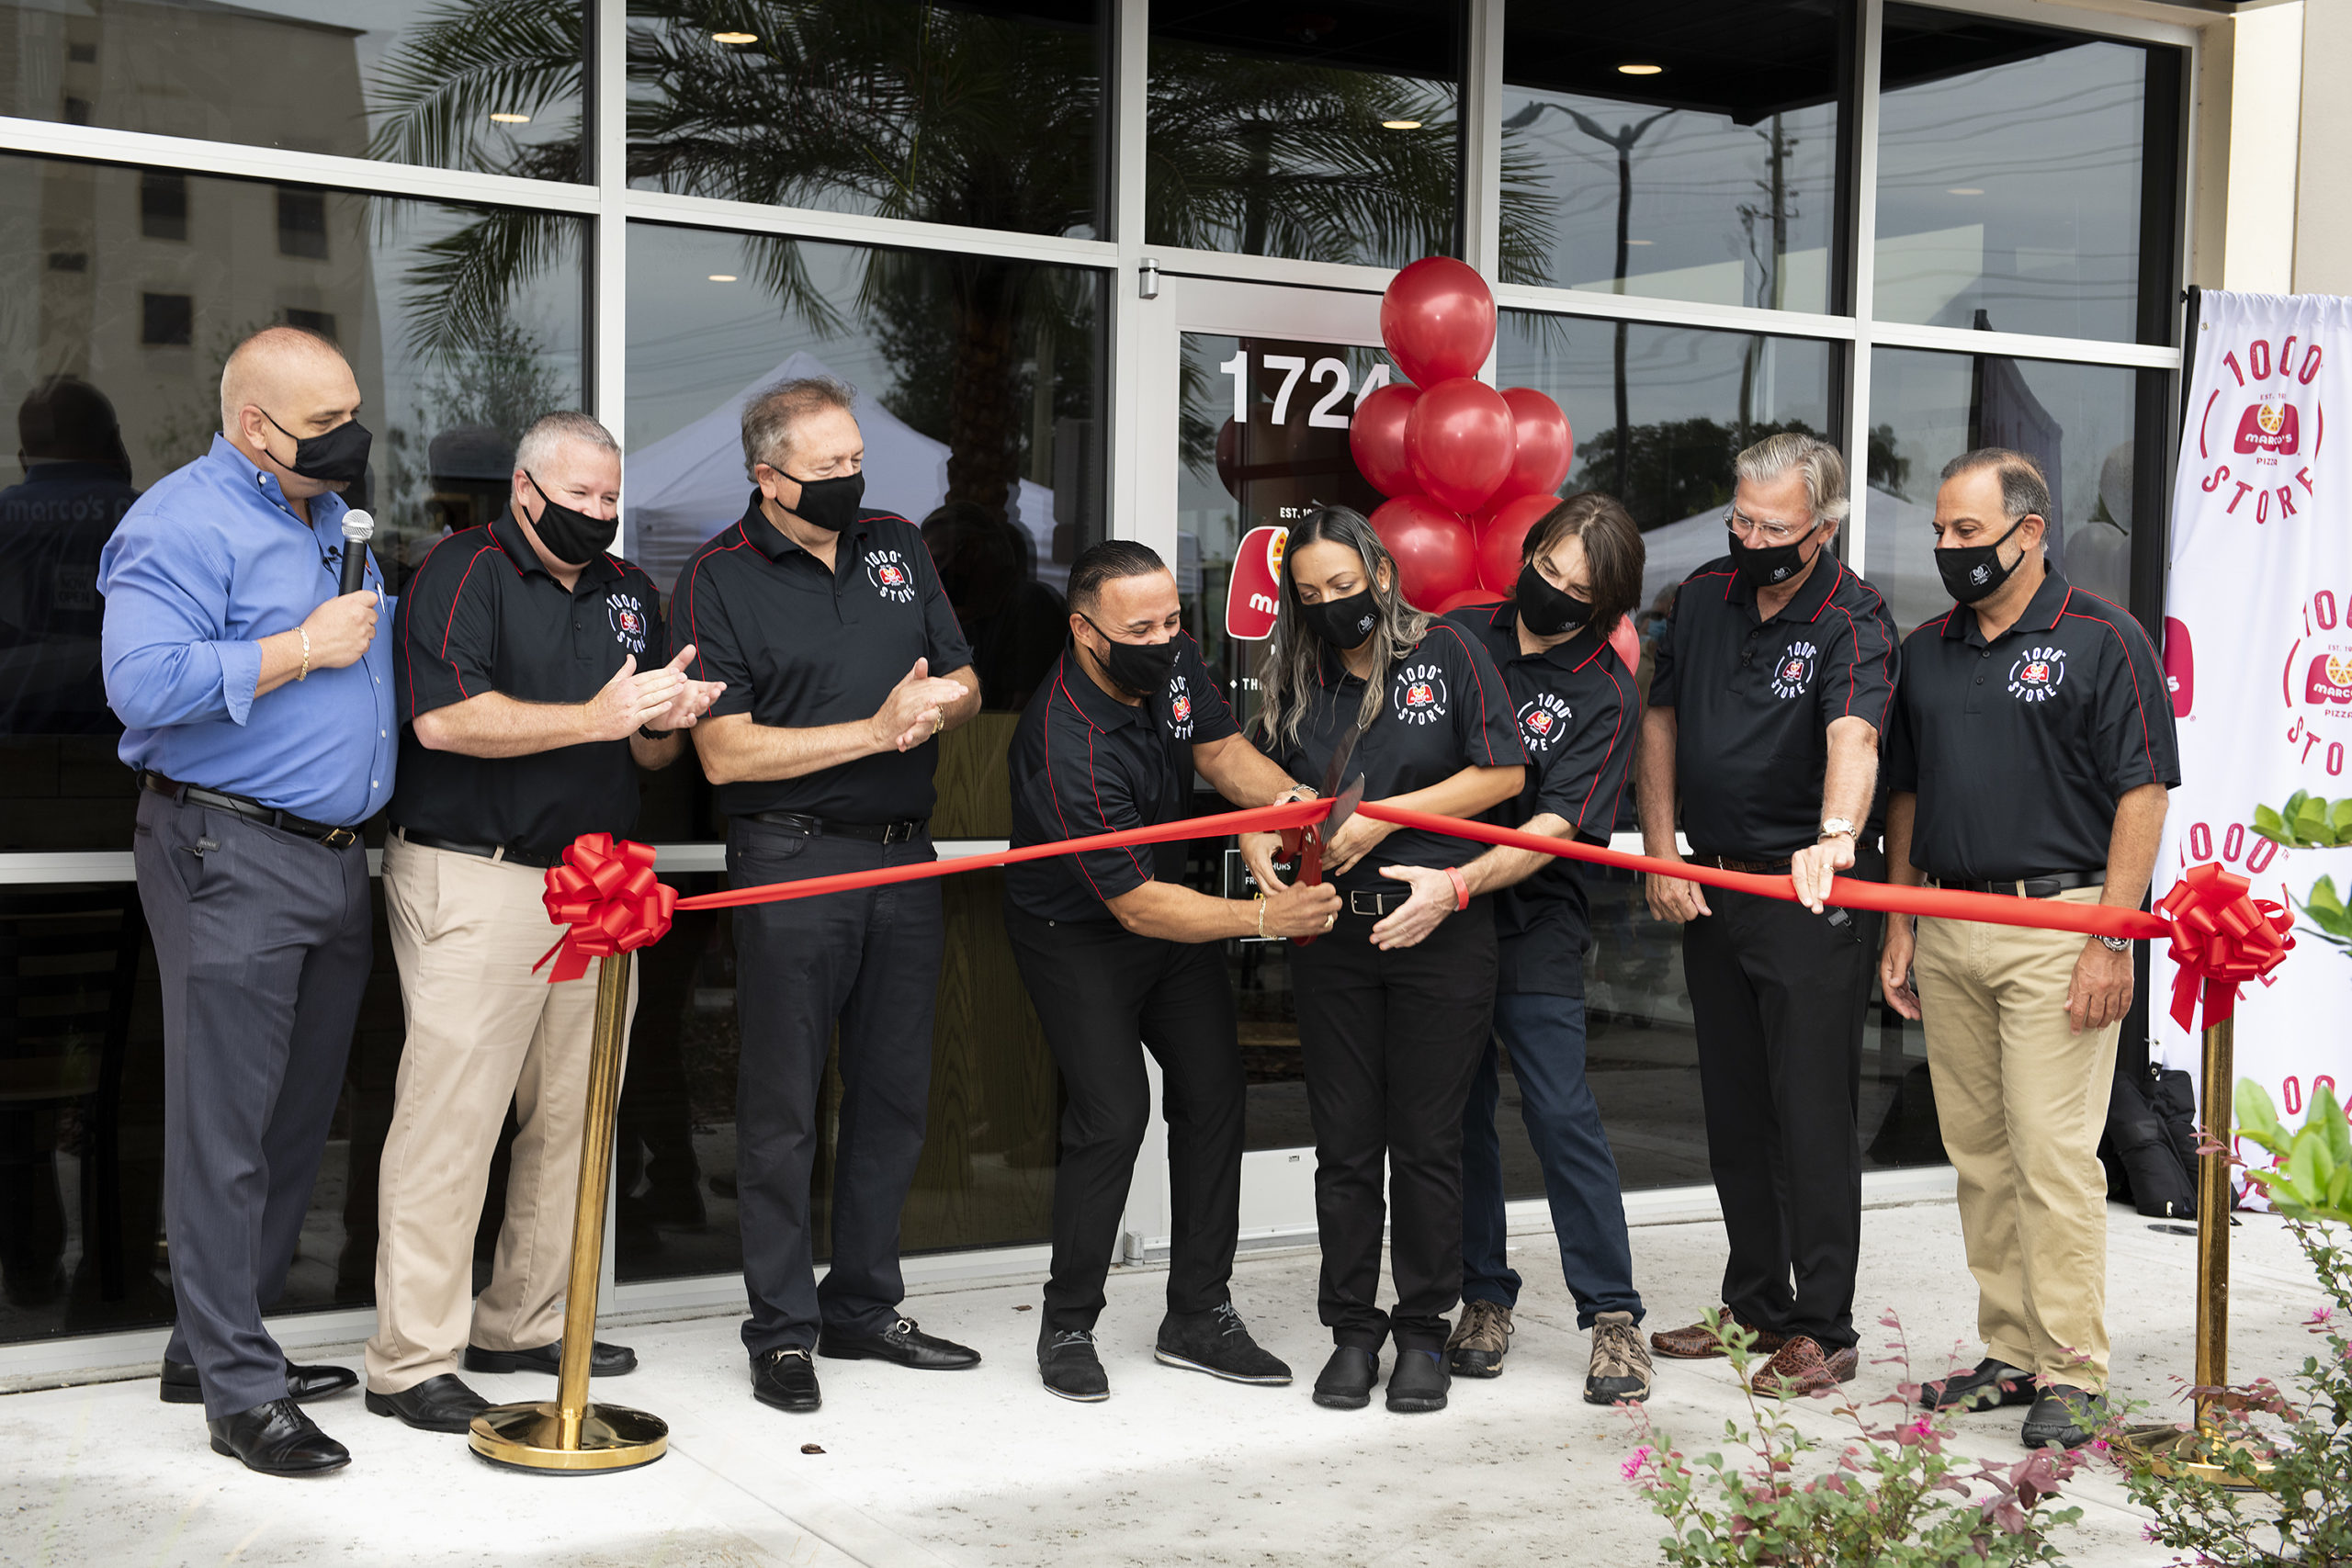 Featured image for “Marco’s opens milestone 1,000th store”